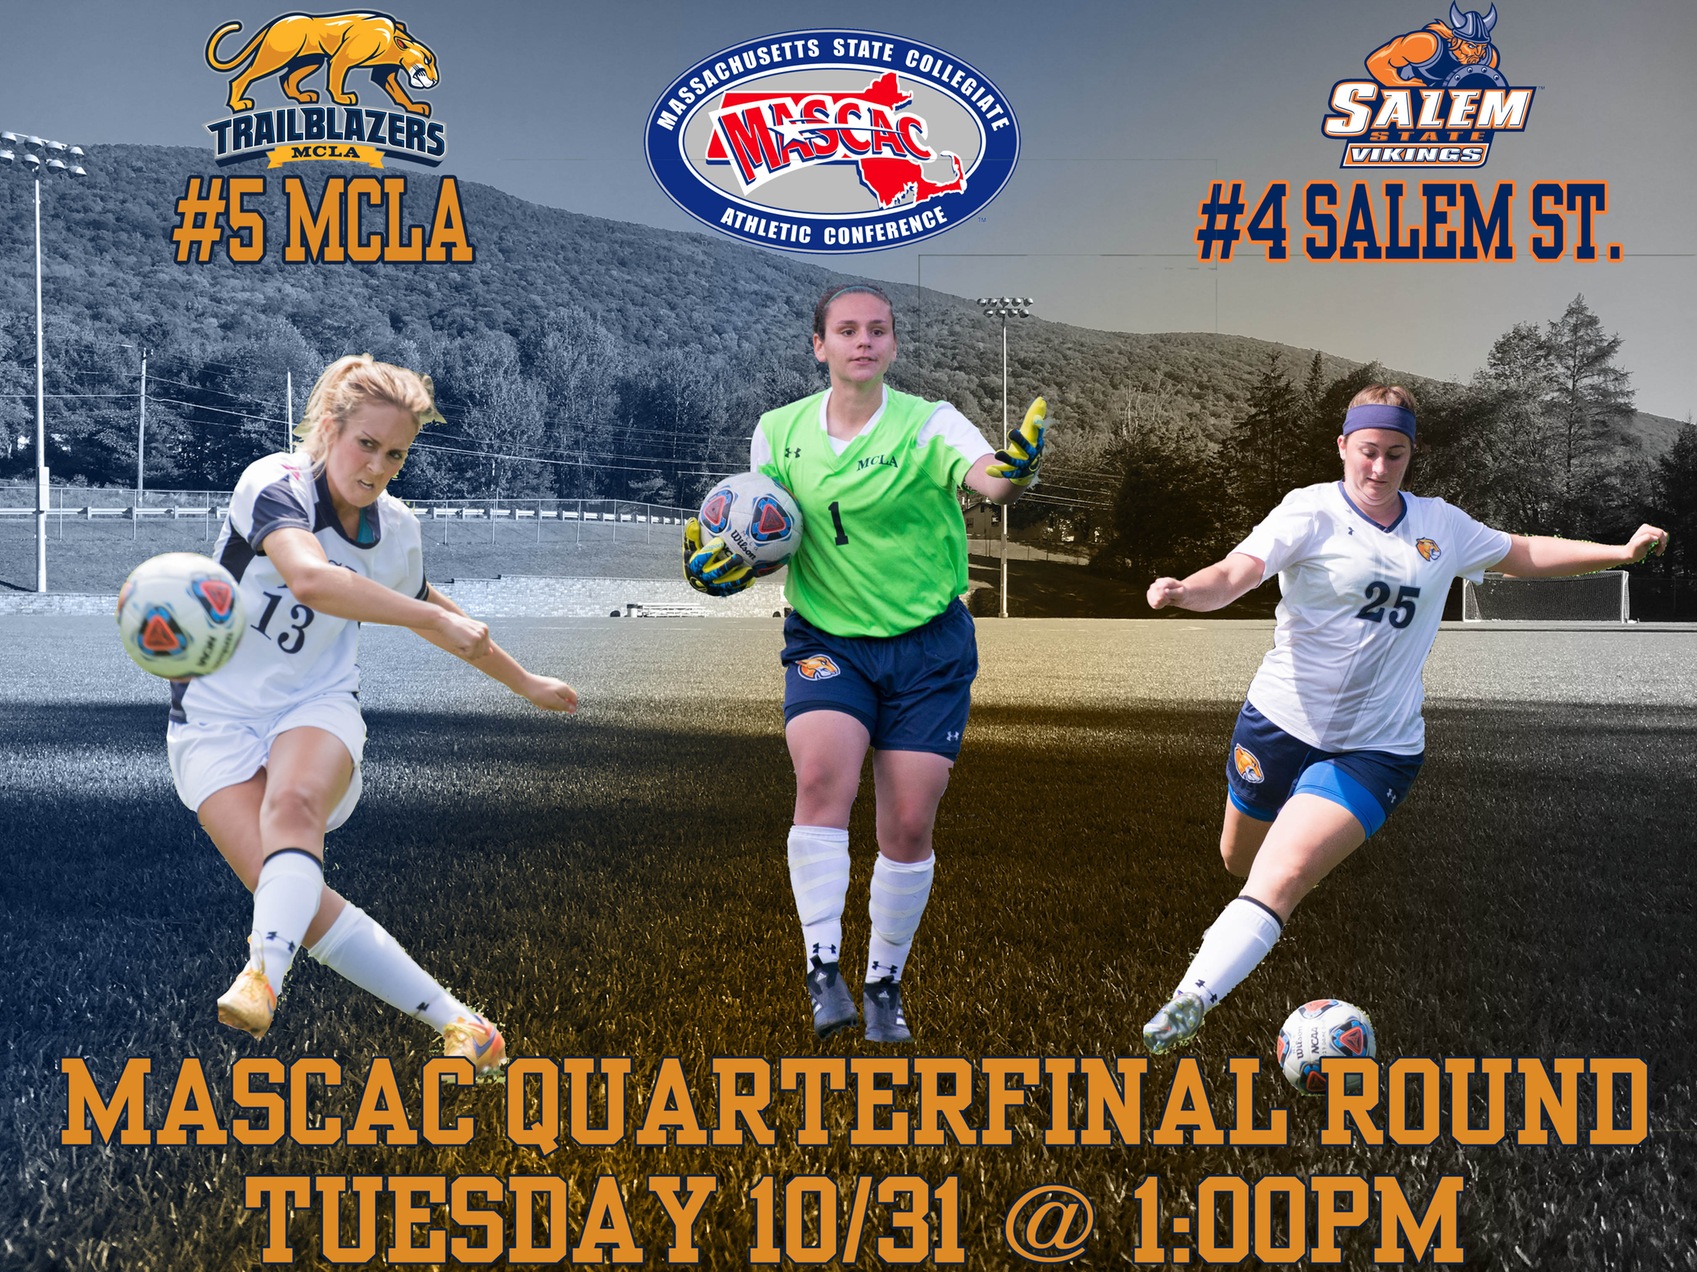 #5 Women's Soccer set to face #4 Salem on Halloween in MASCAC Quarterfinal Round